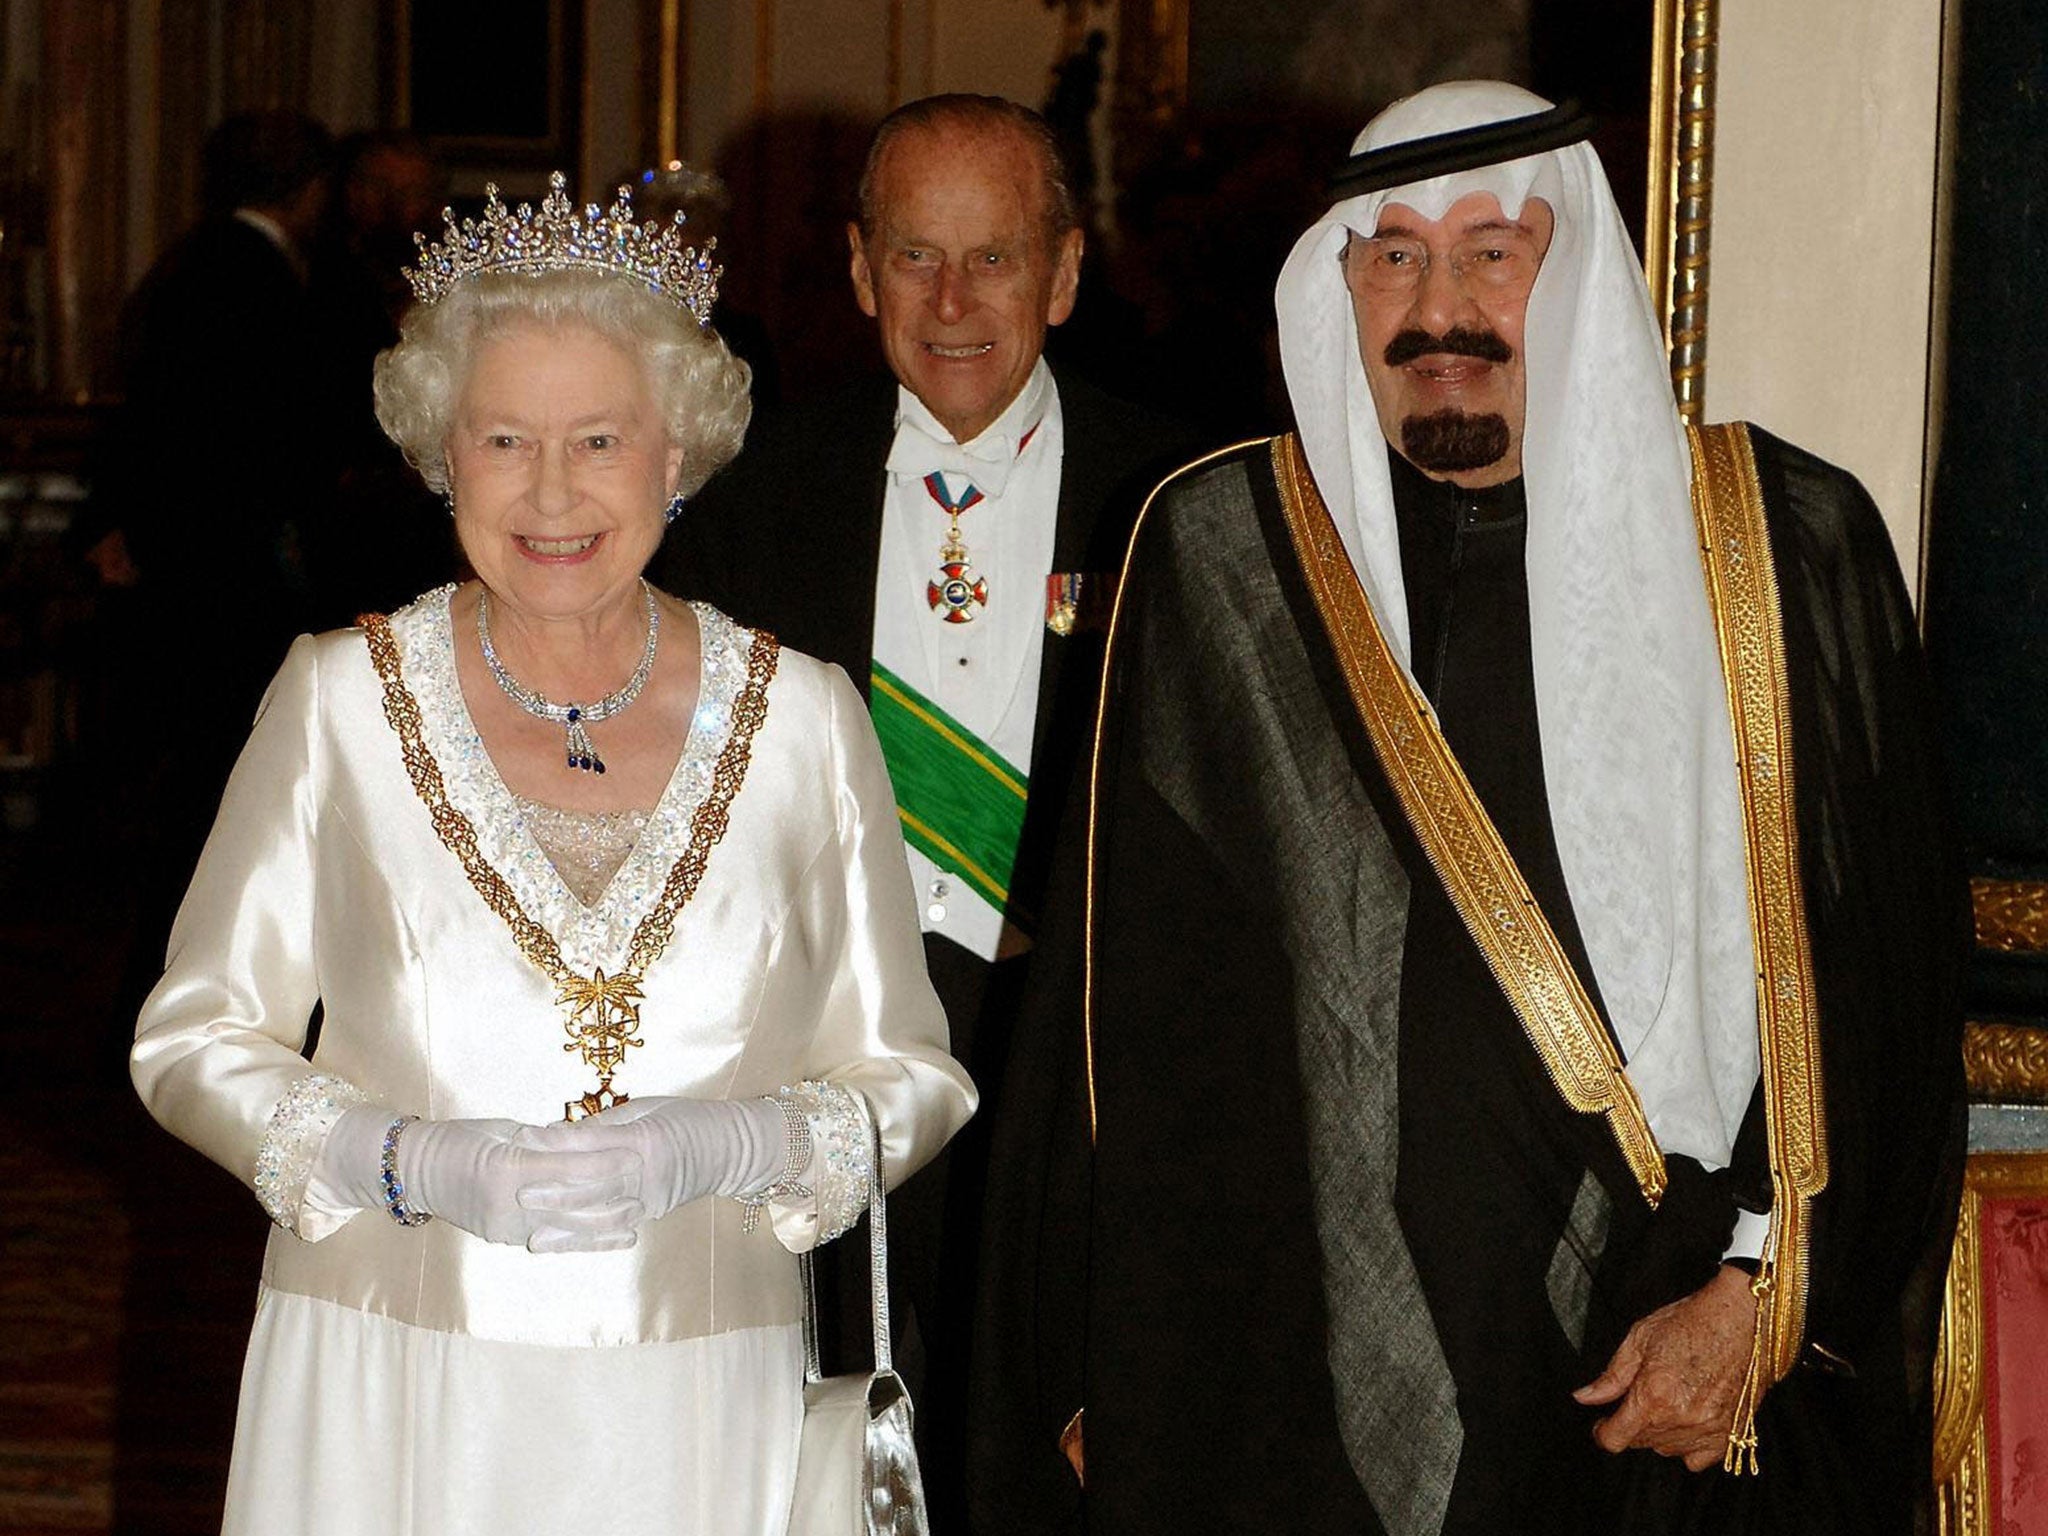 King Abdullah of Saudi Arabia with Queen Elizabeth and the Duke of Edinburgh at a banquet in Buckingham Palace during his 2007 visit